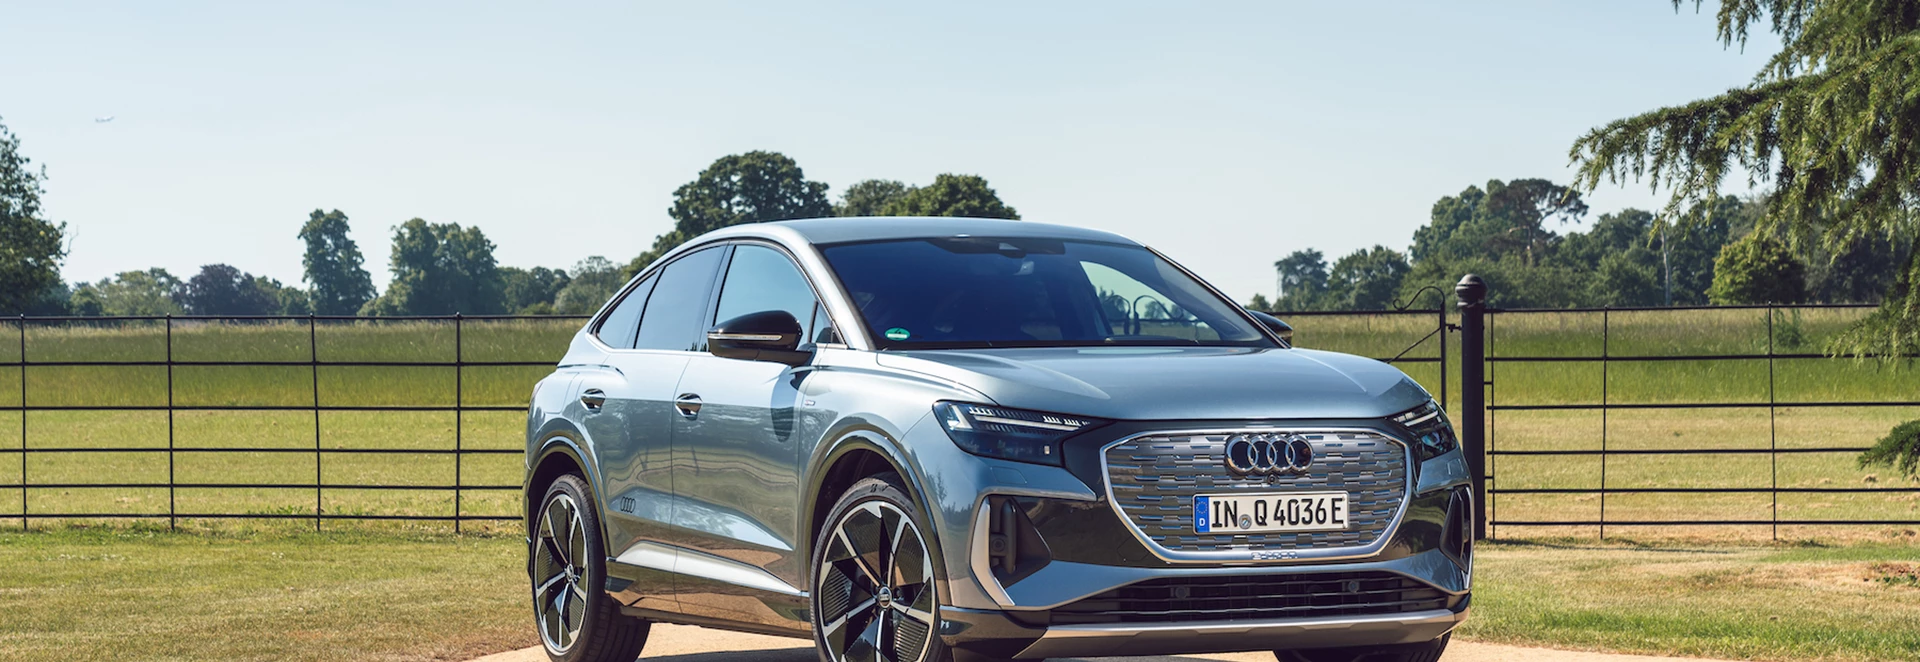 New electric Q4 e-tron and e-tron Sportback prices and specifications detailed 